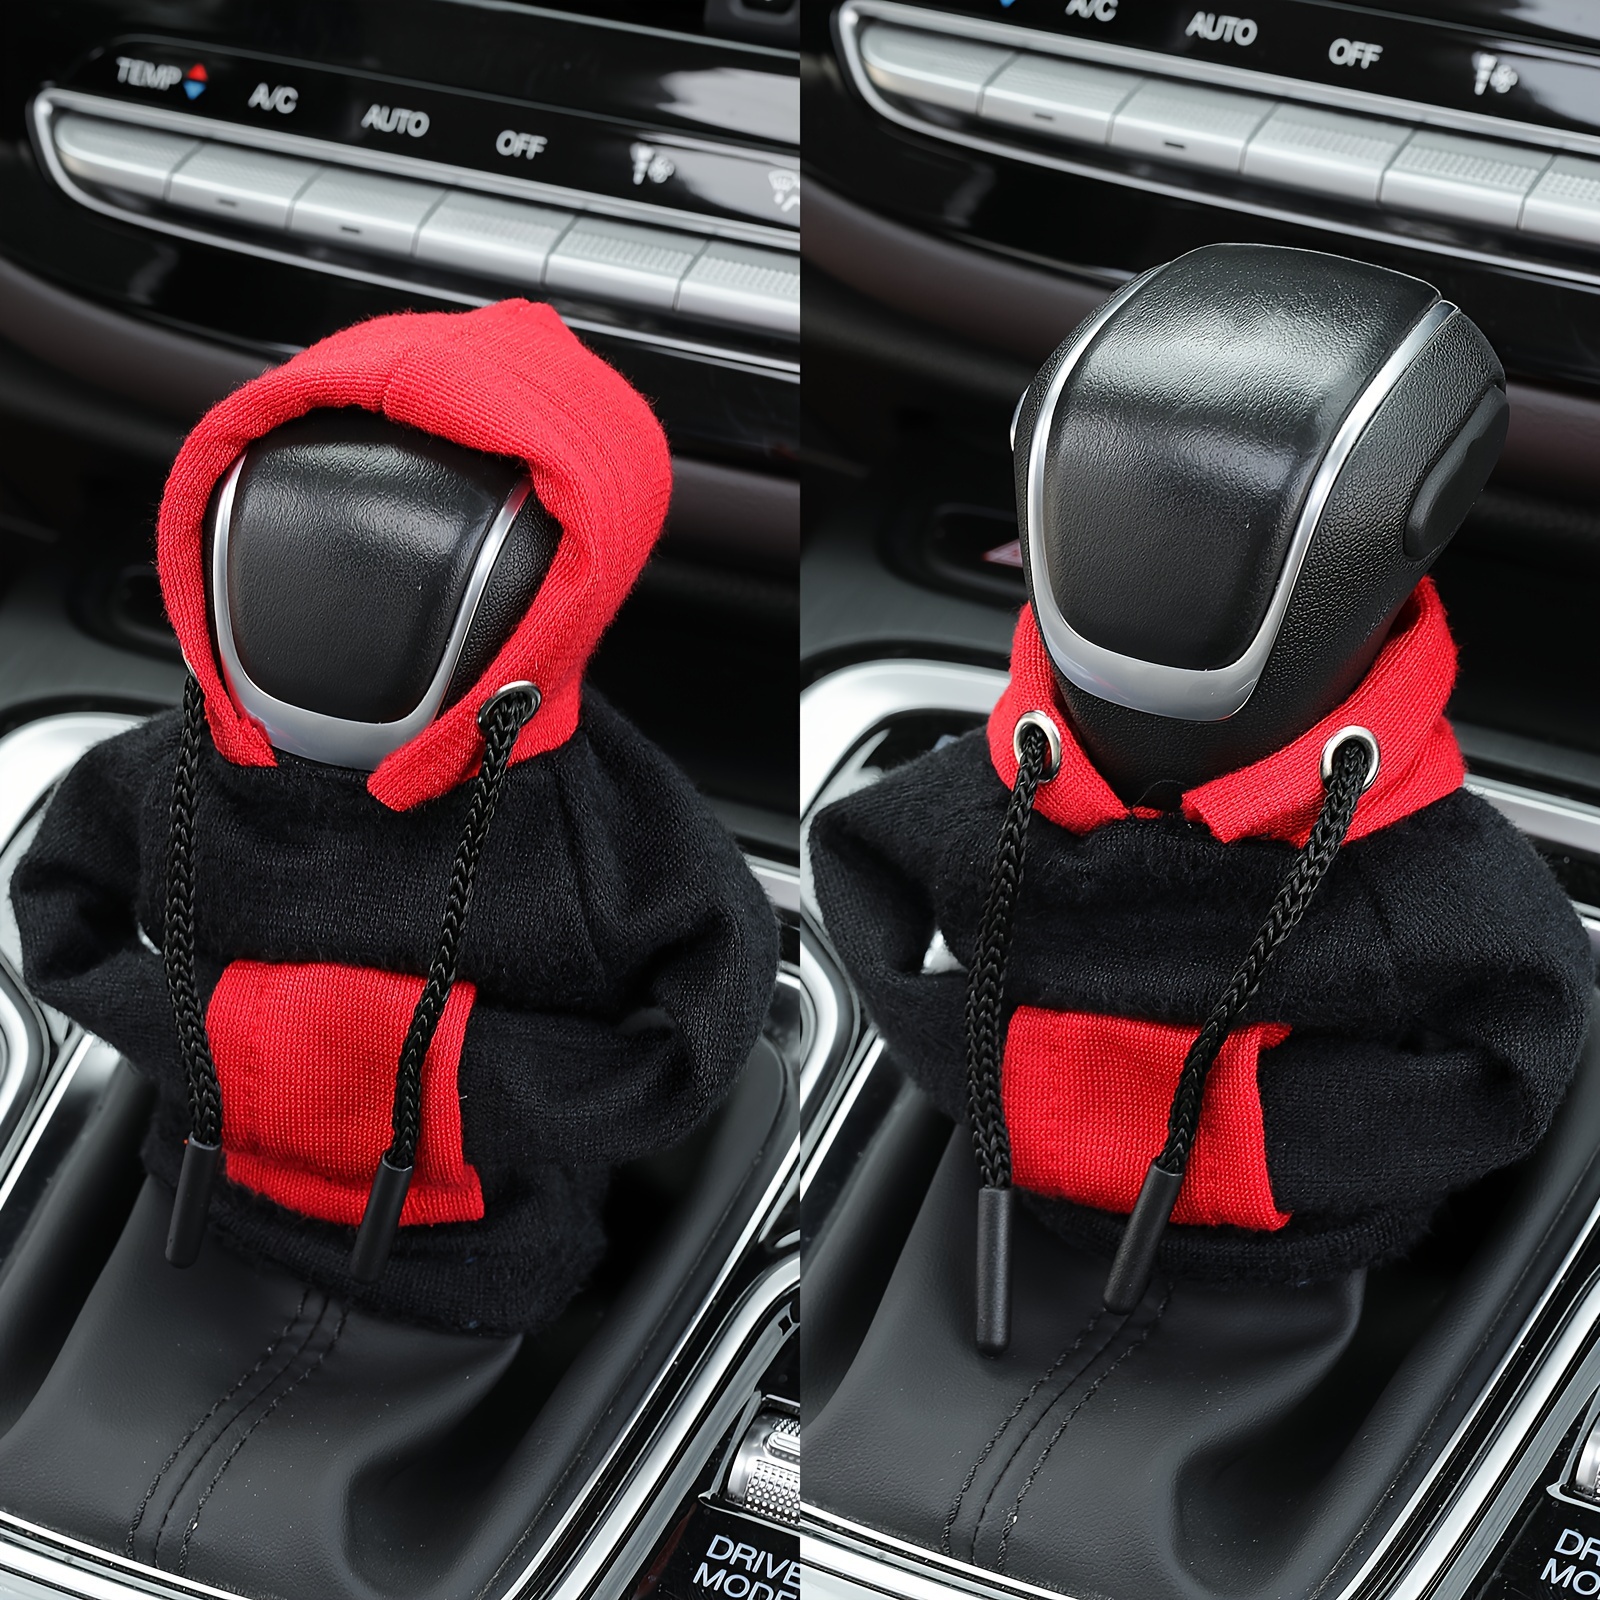 Shift Knob Hoodie Cover For Car Size Shifter Knob Hoodie - Temu Germany